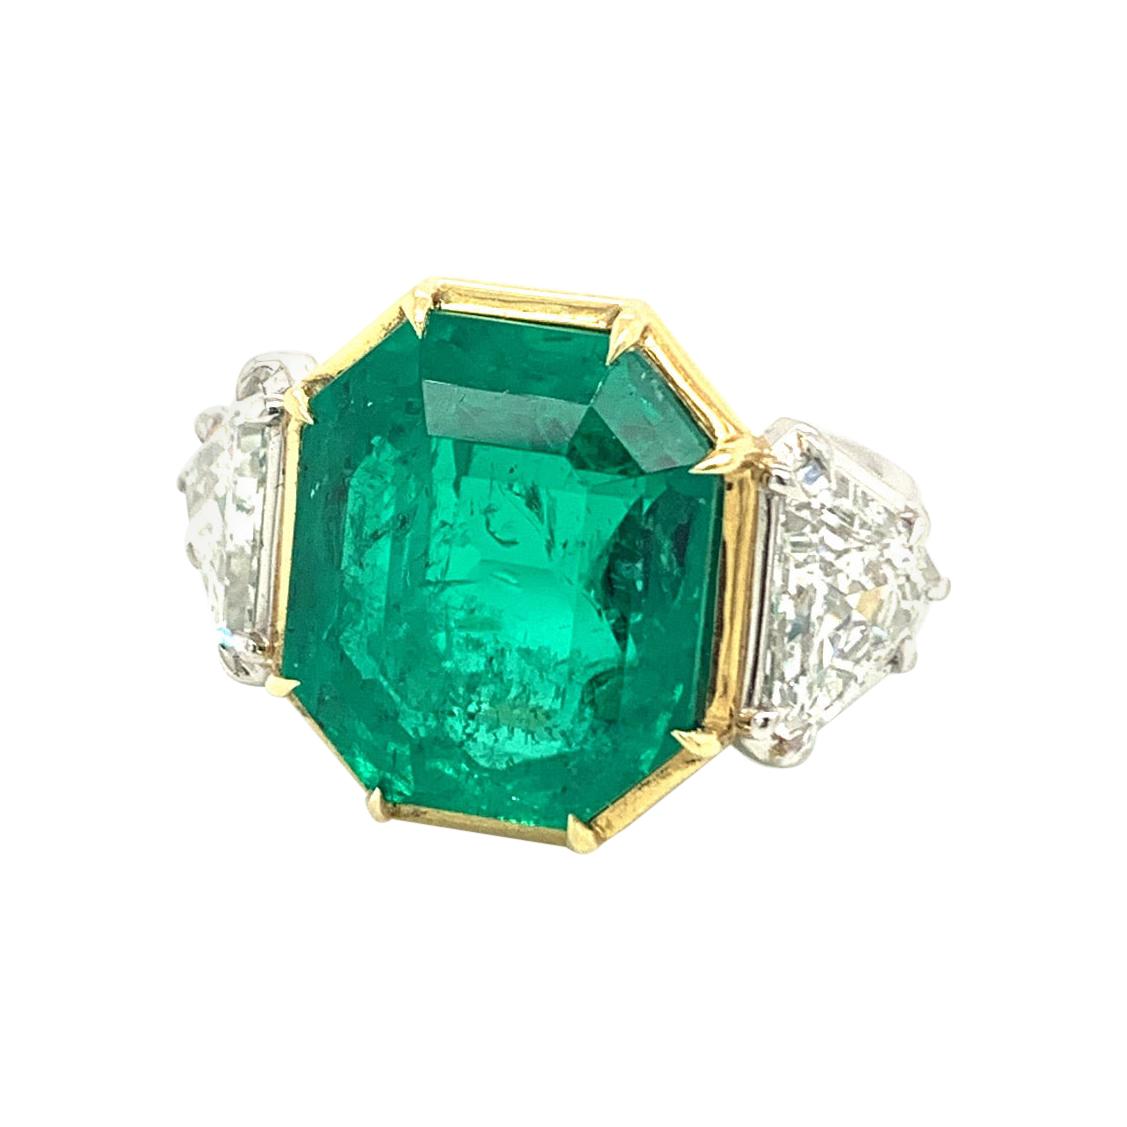 Jack Weir & Sons 10 Carat AGL Certified Colombian Emerald Diamond Platinum Ring